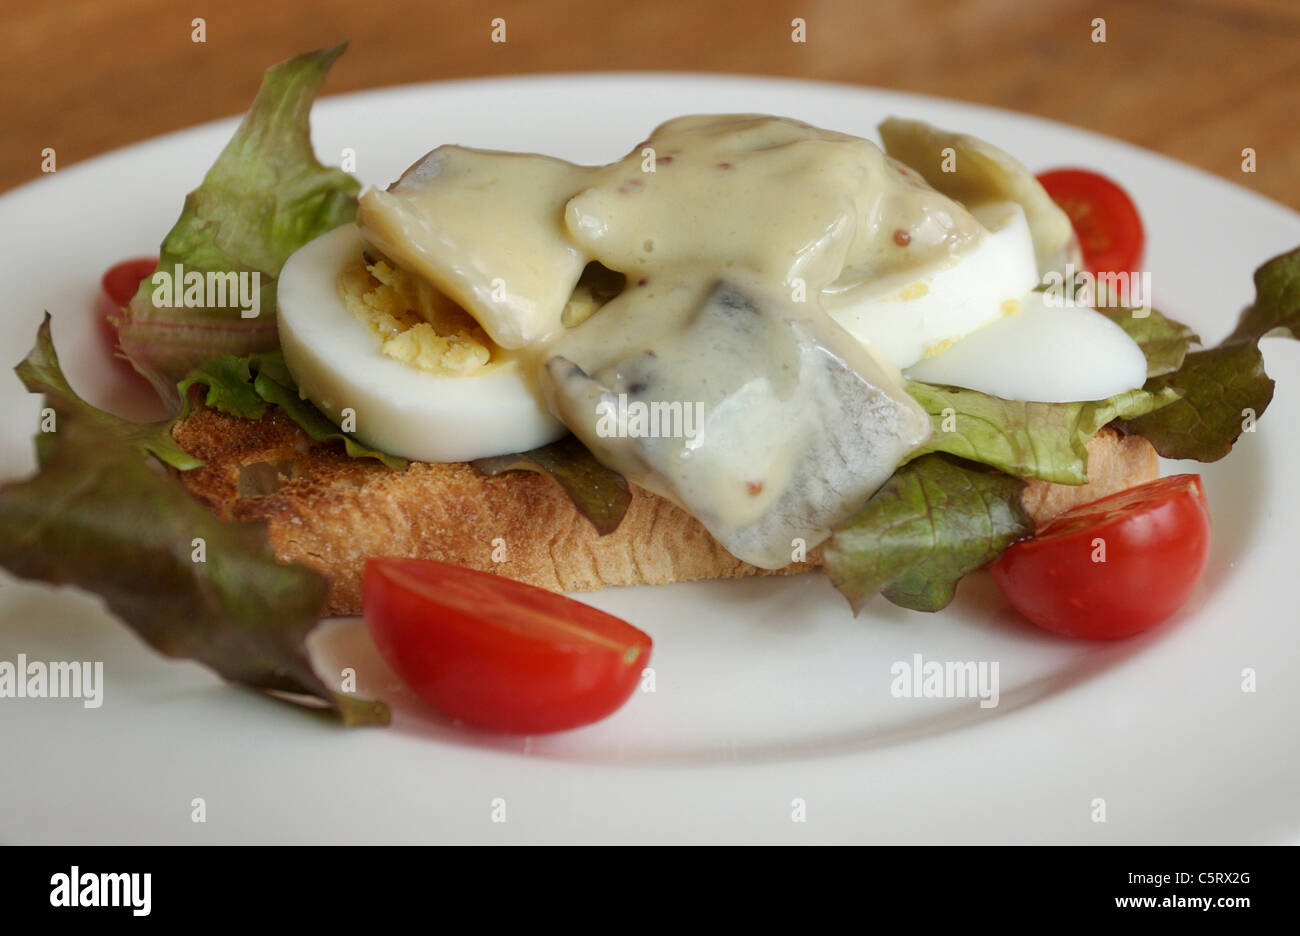 pickled herring on toast with salad Stock Photo